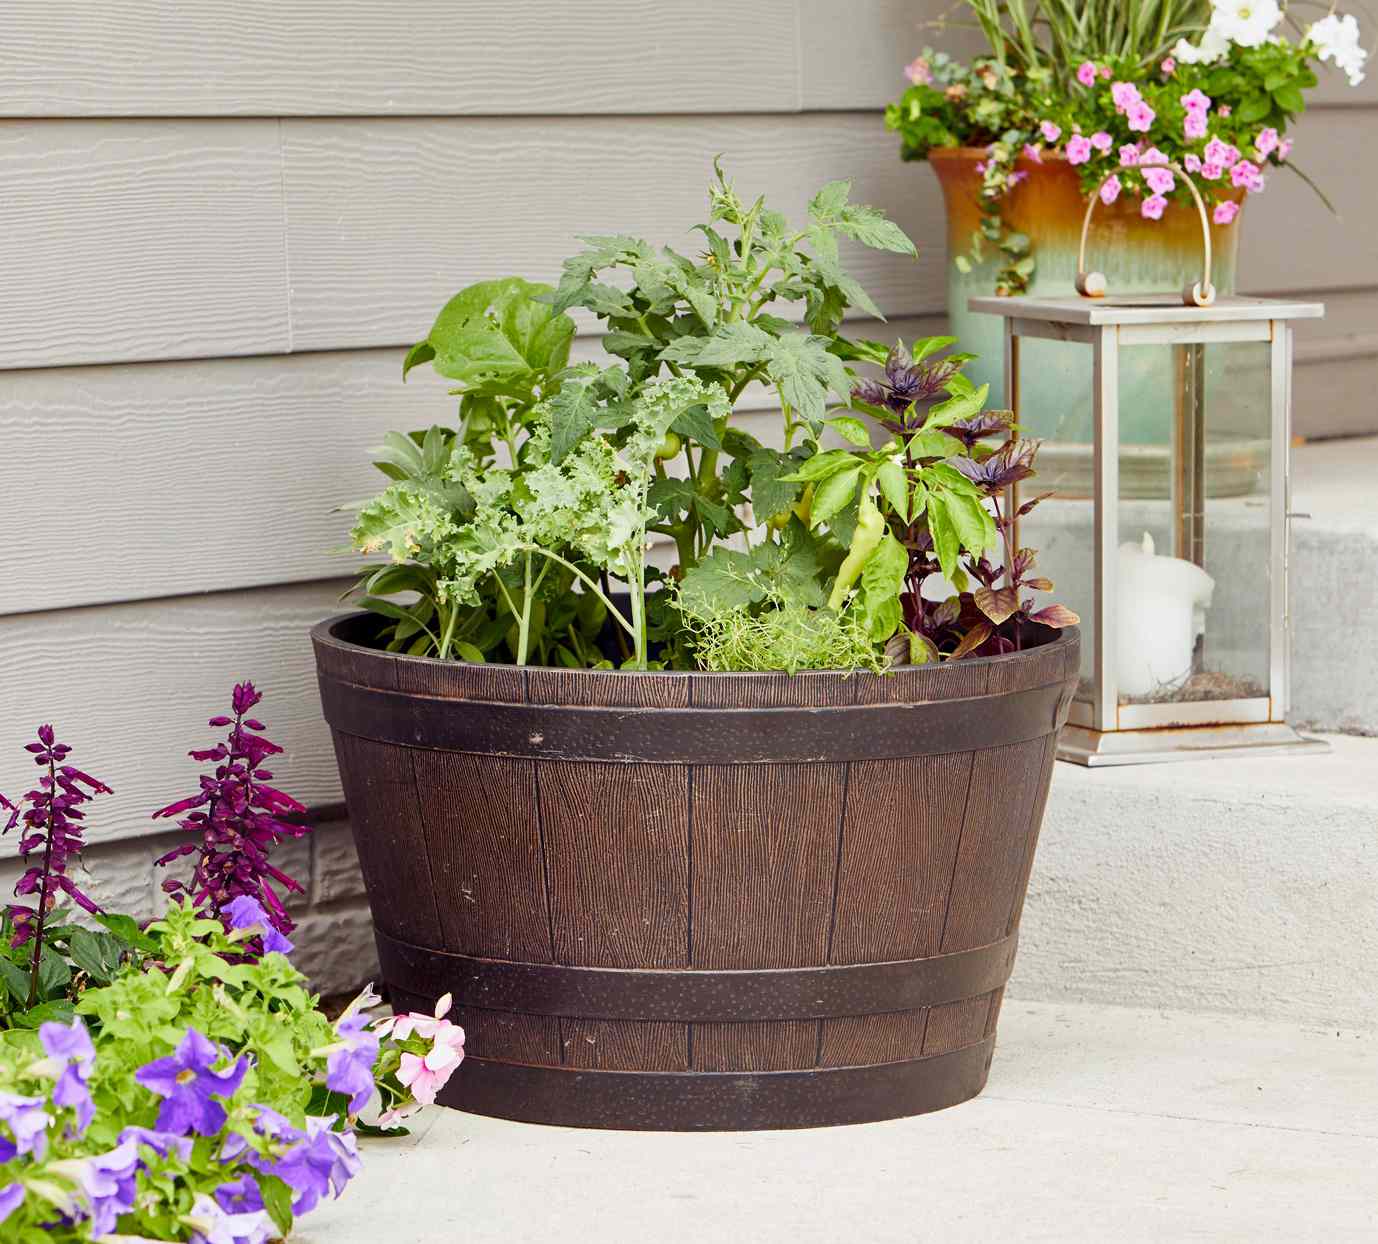 Planting garden in pots on porch how